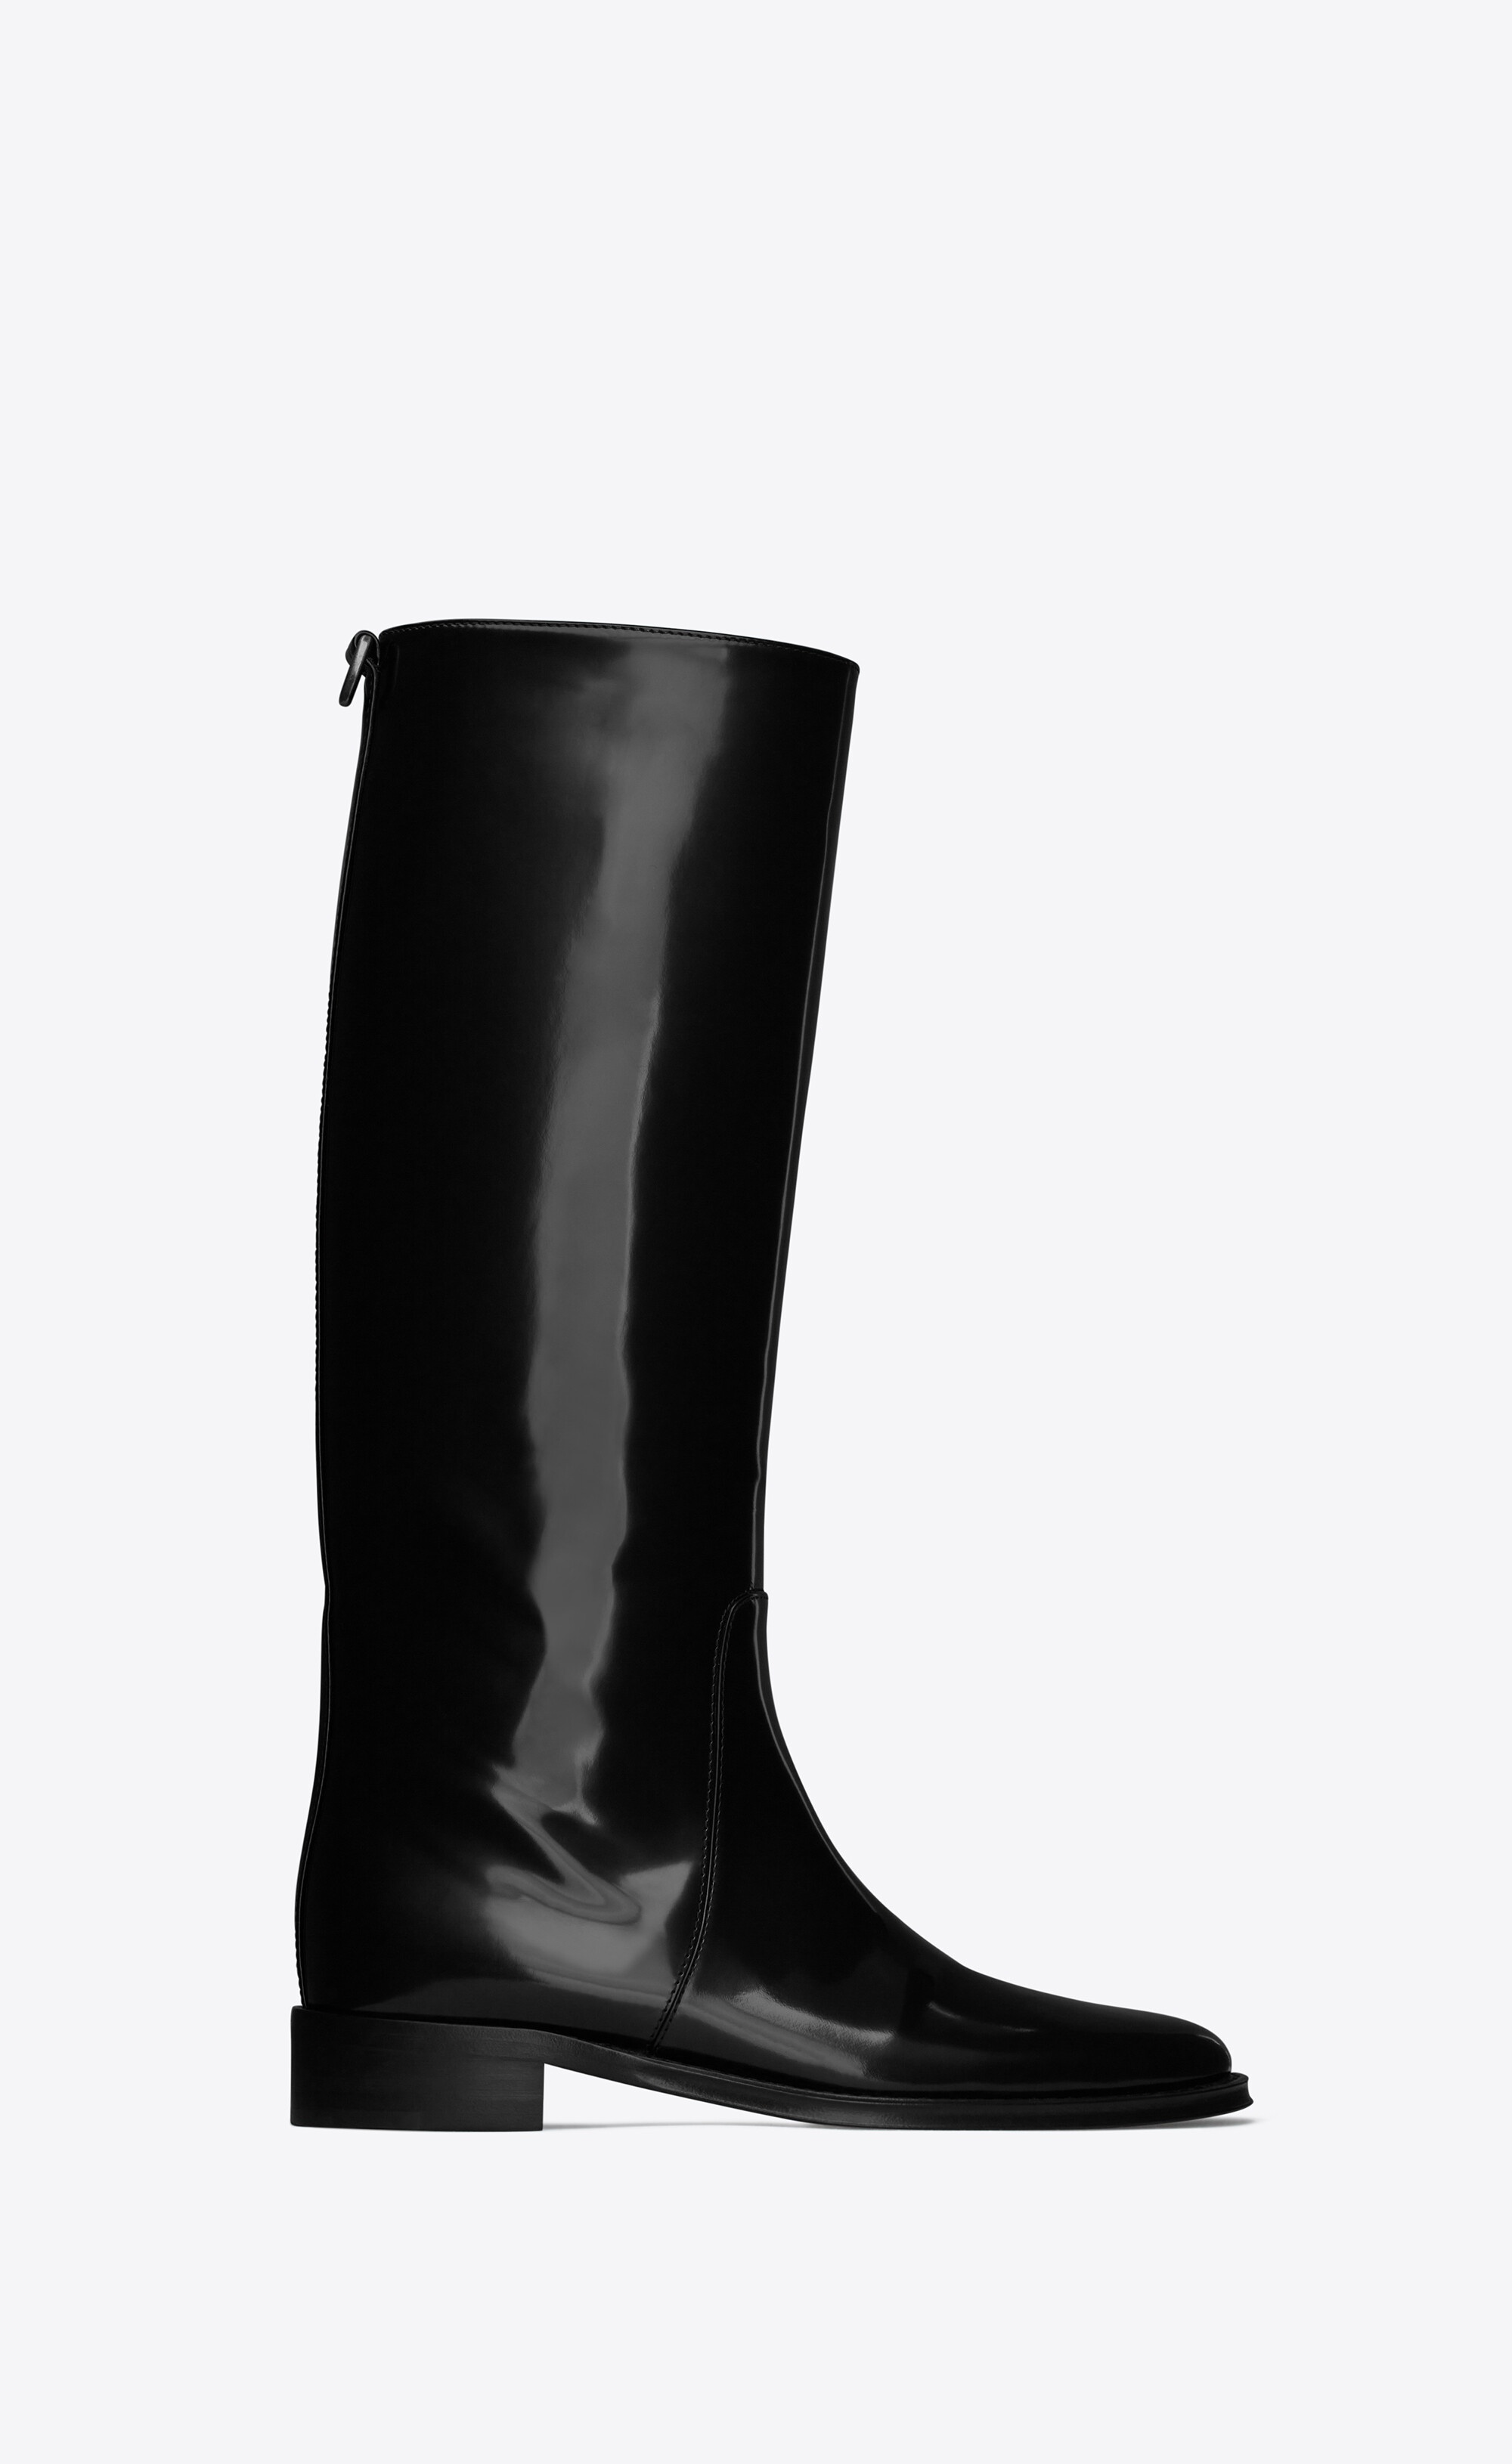 hunt boots in glazed leather - 1